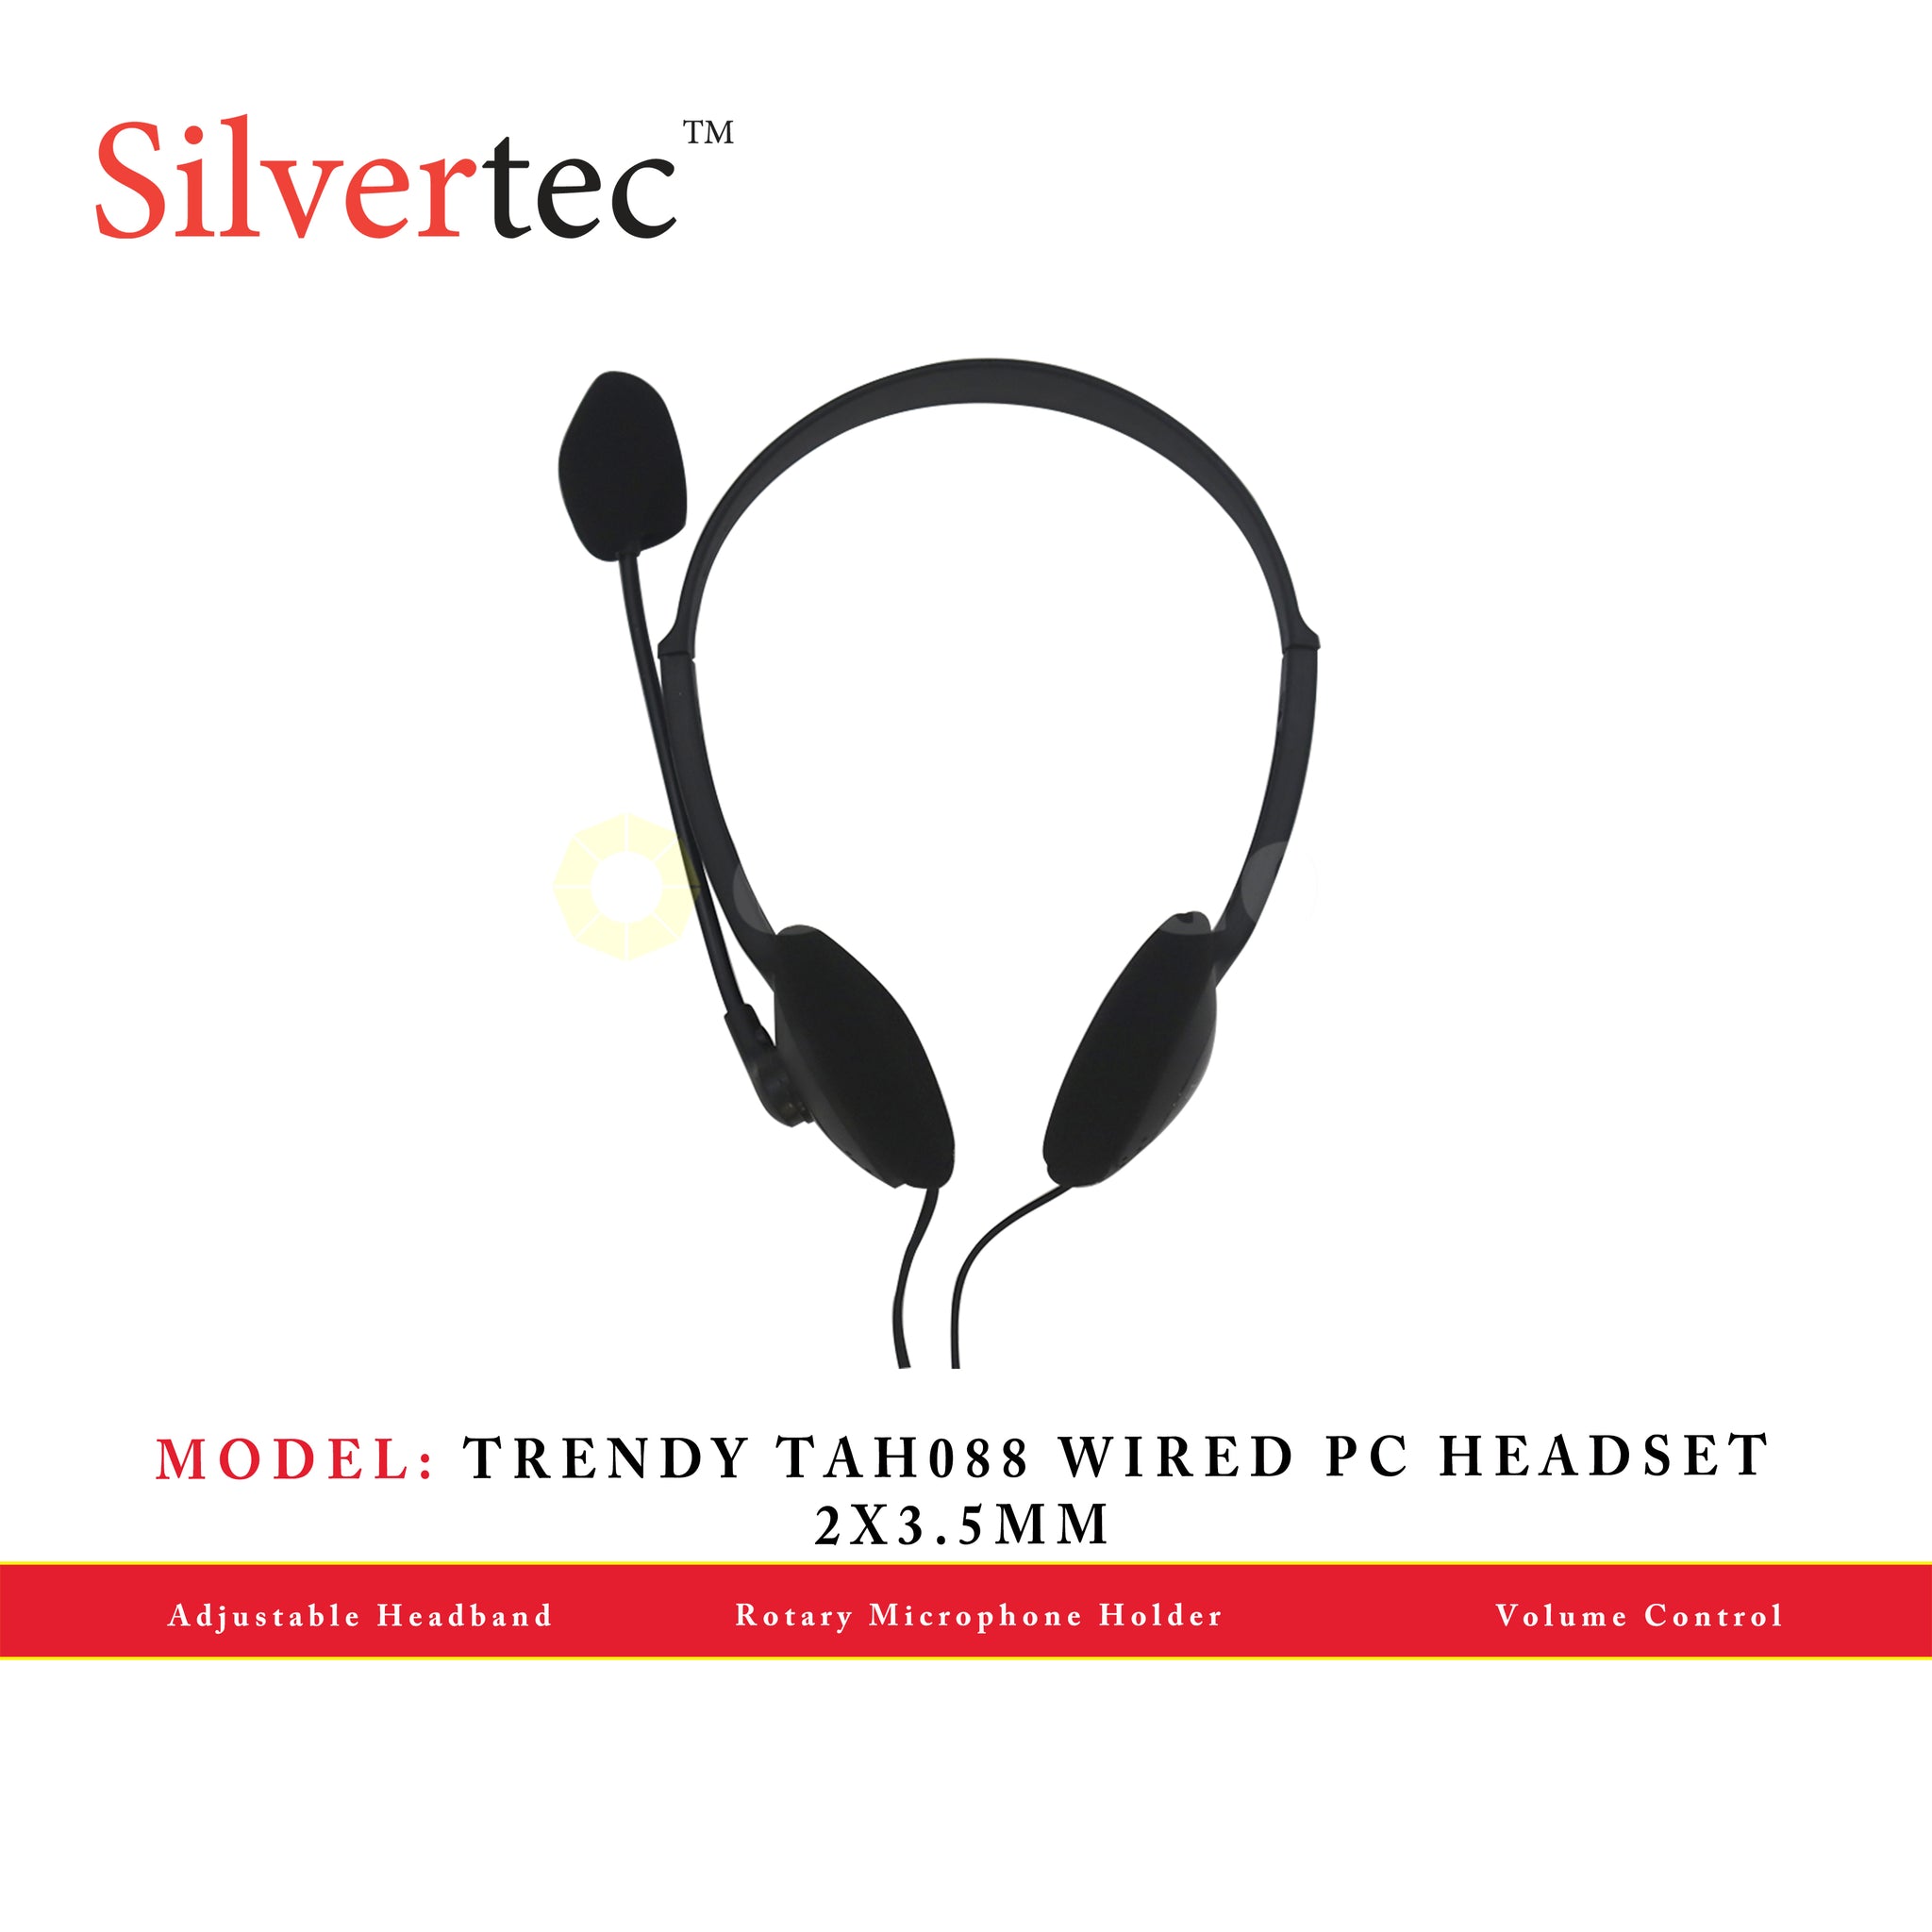 TRENDY TAH088 WIRED PC HEADSET 2X3.5MM